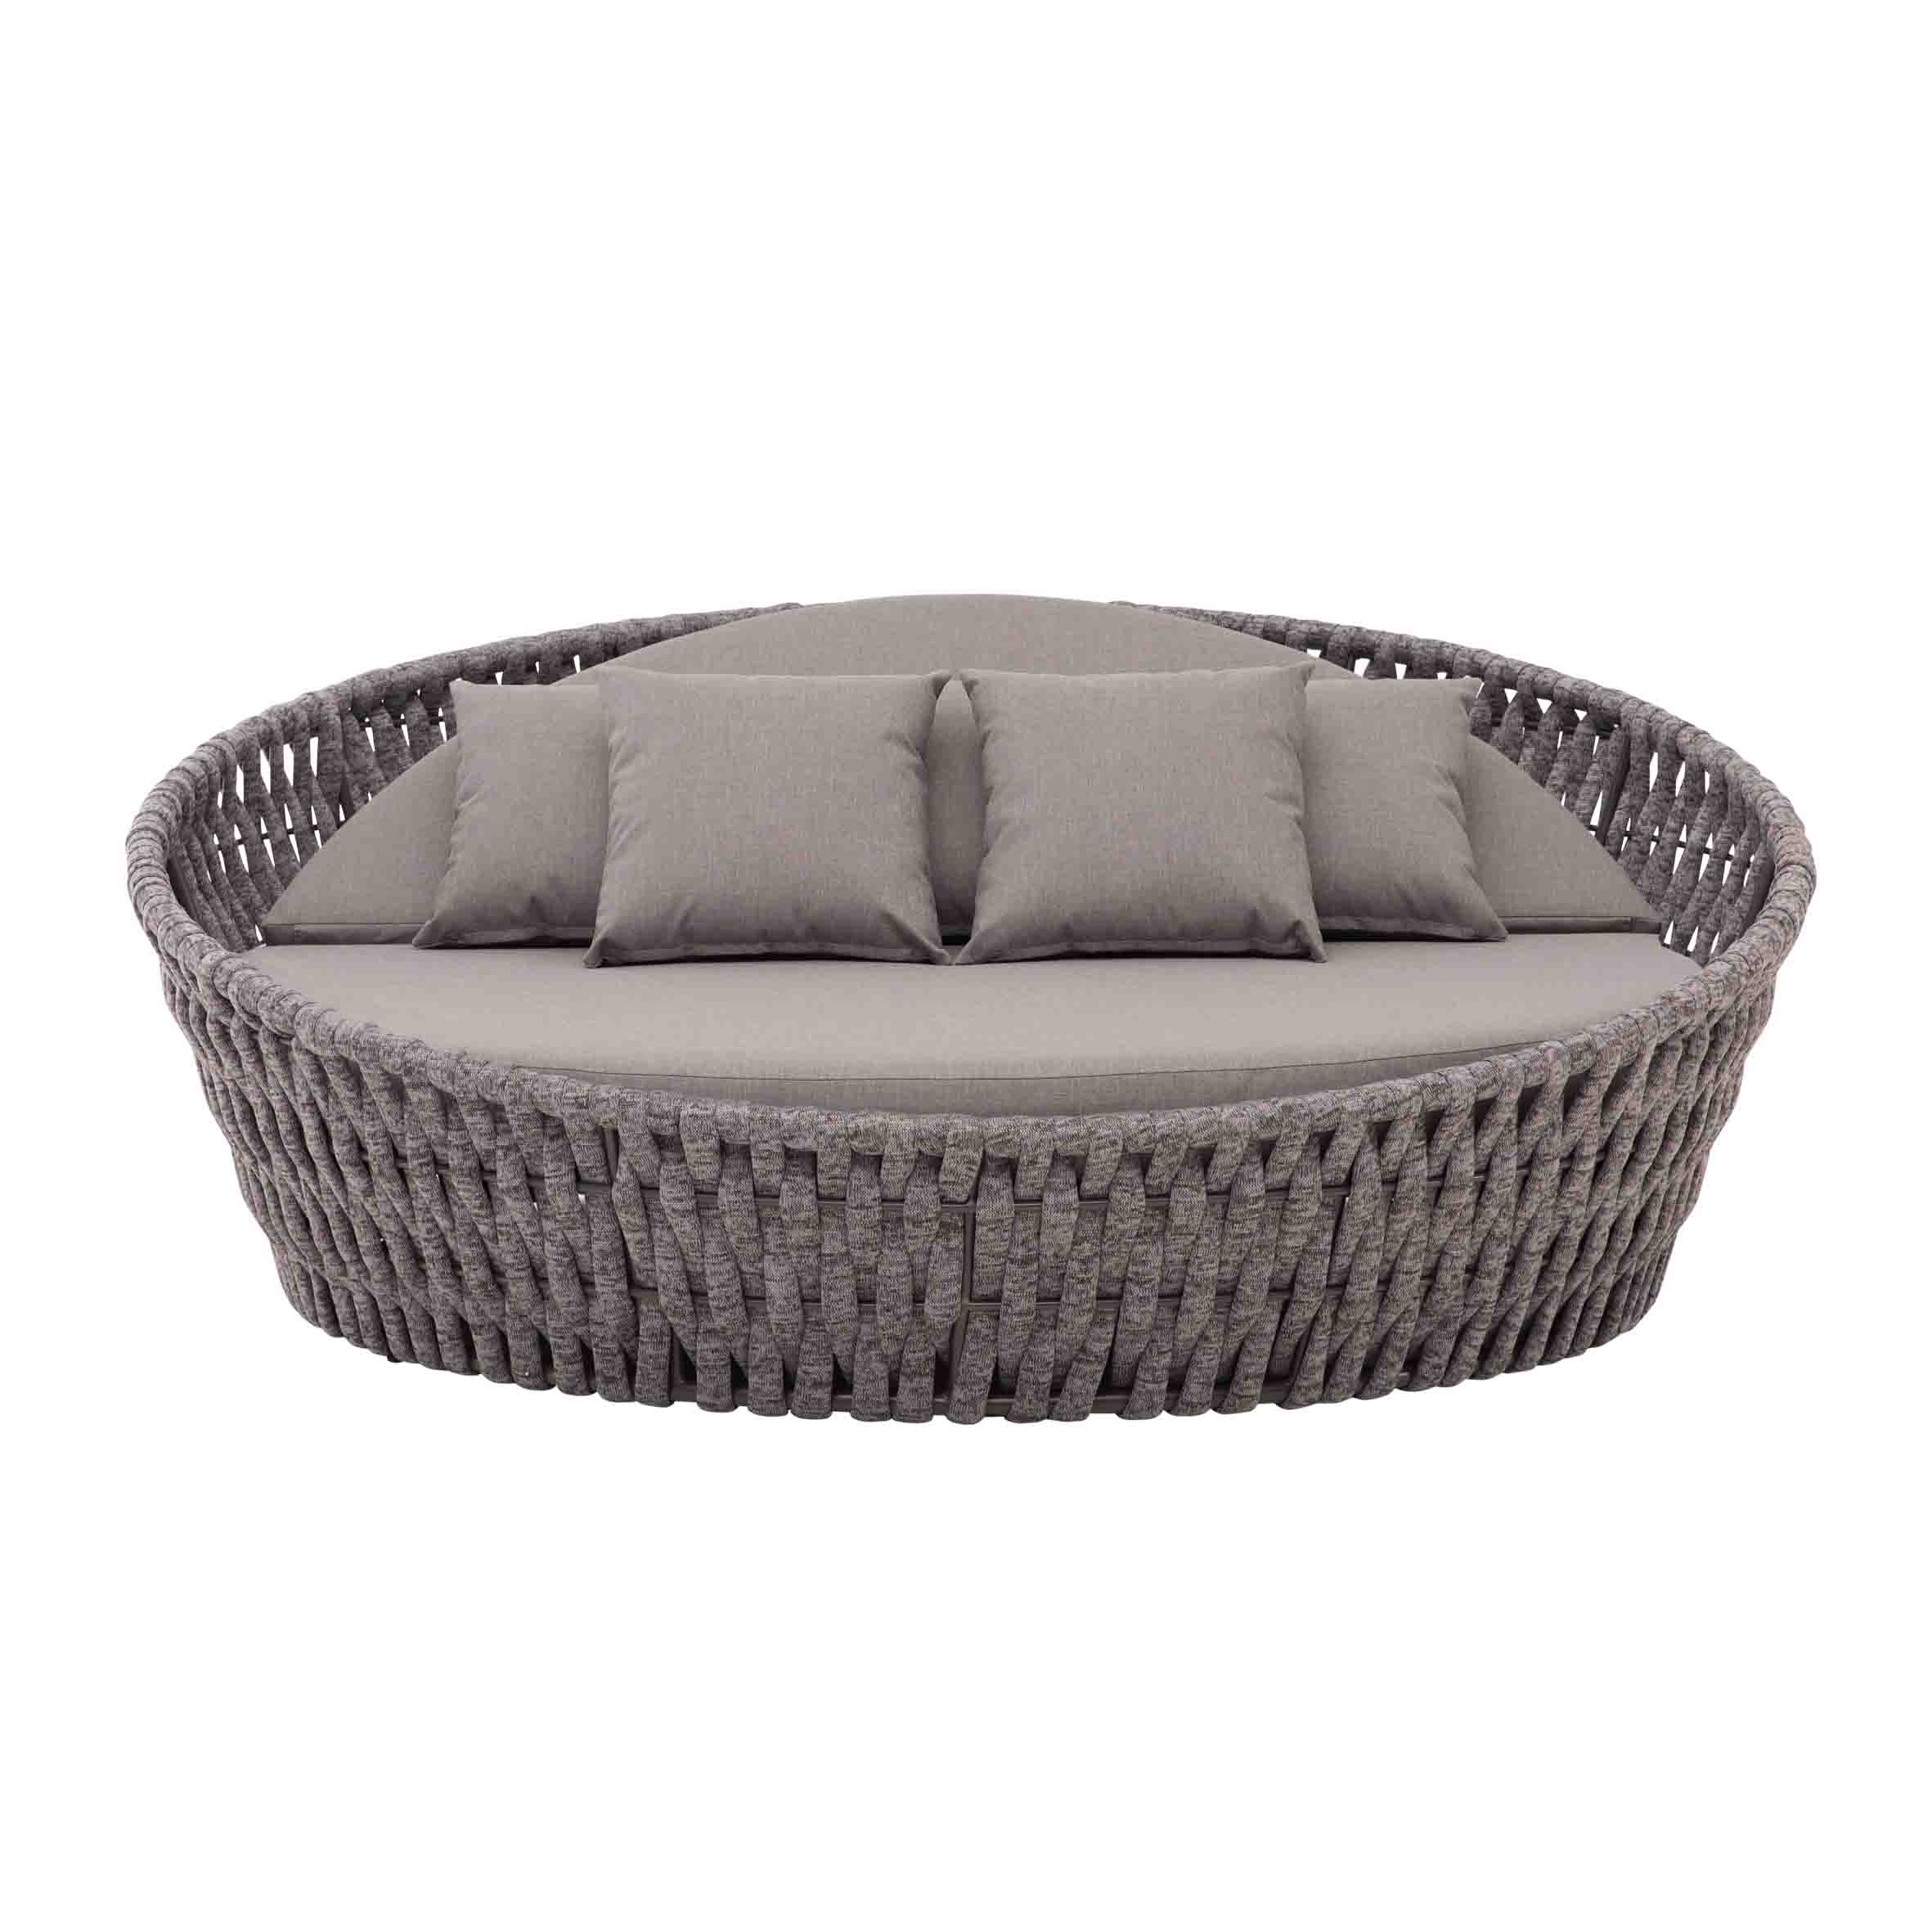 Art rope round daybed S12